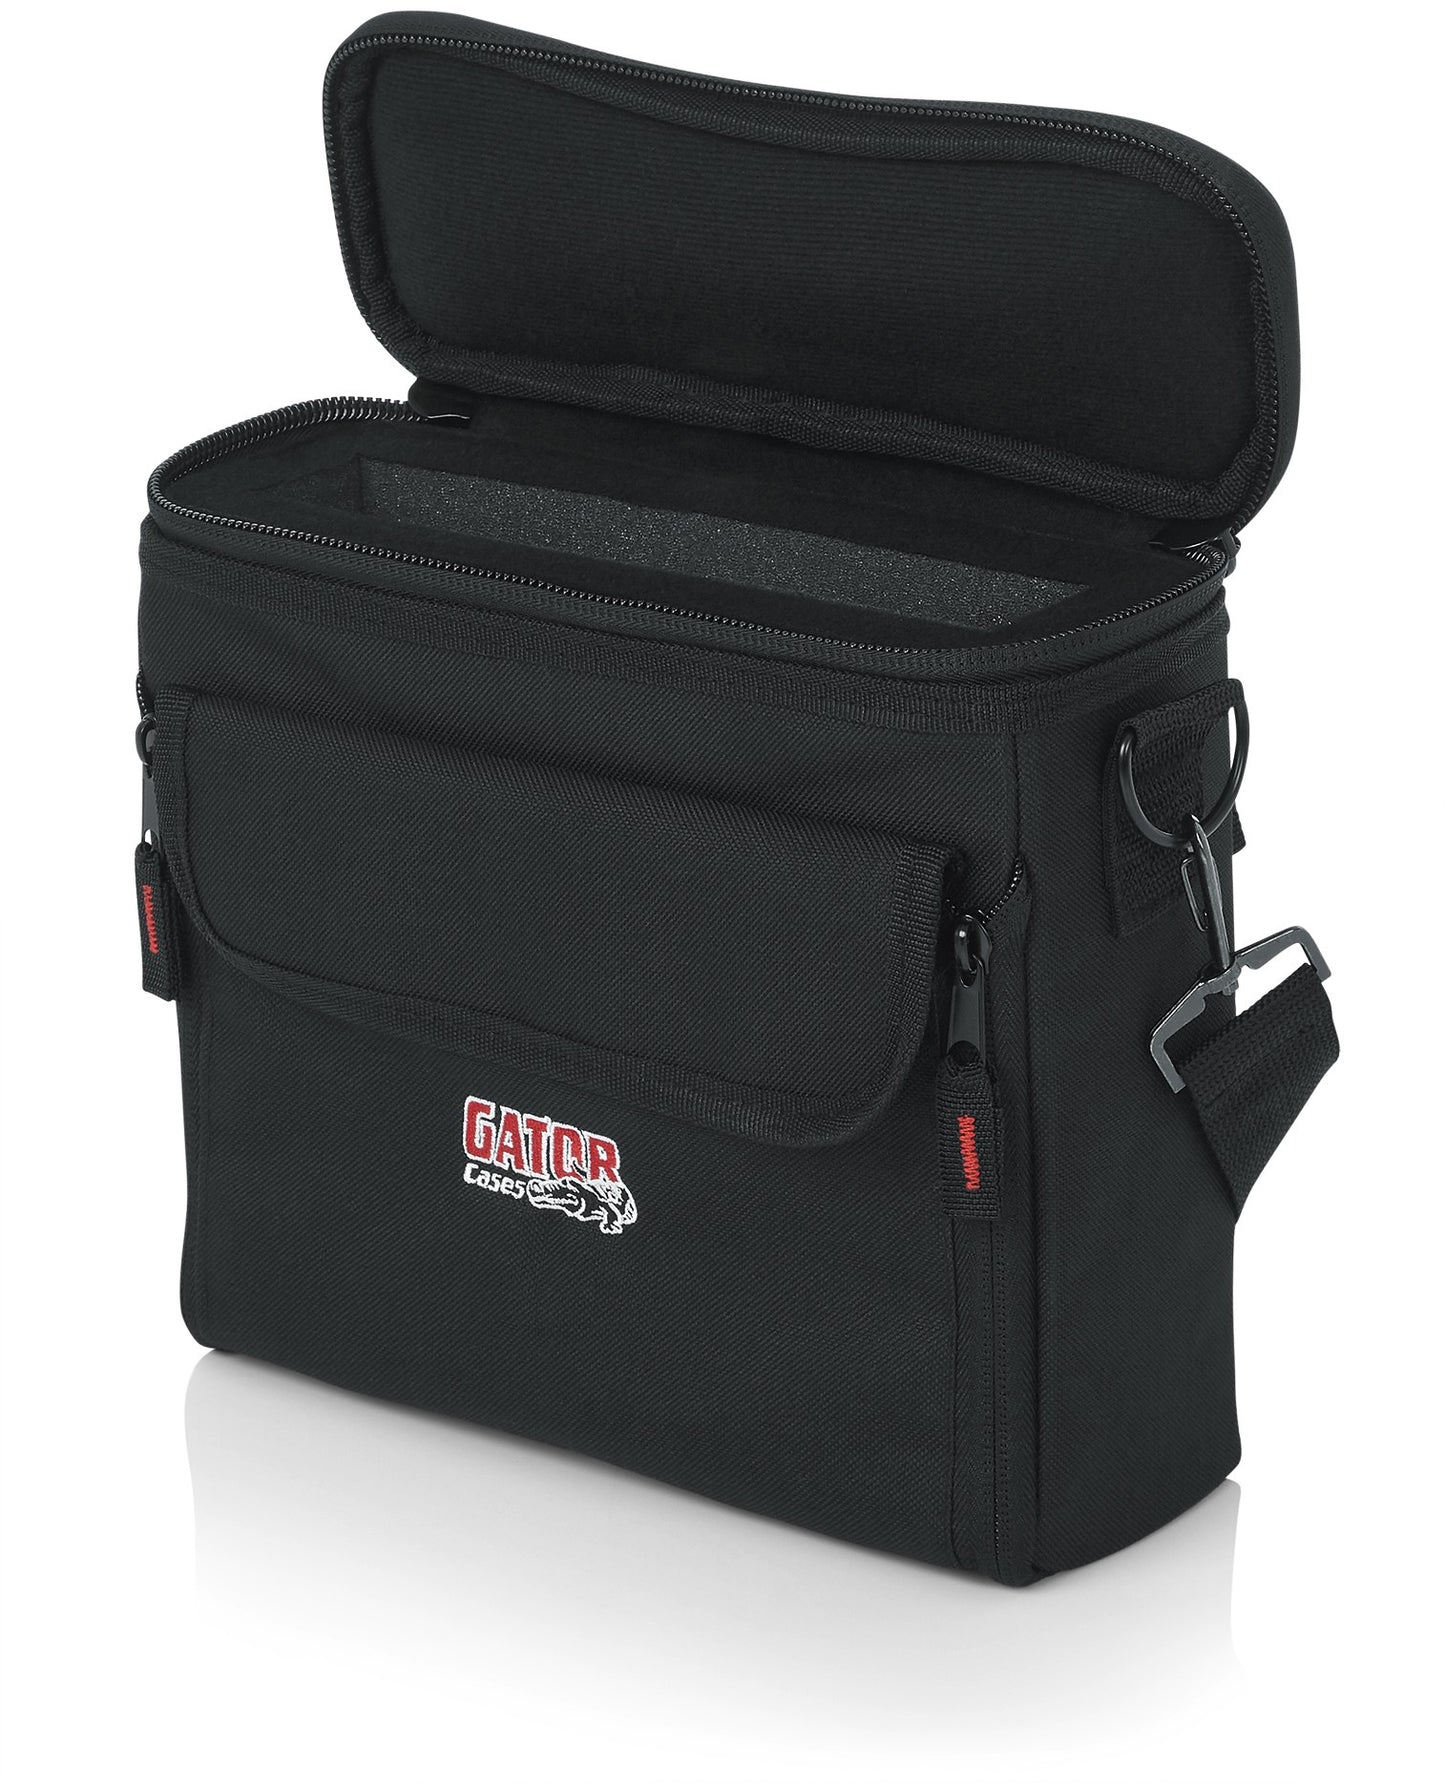 Gator G-IN EAR SYSTEM Bag for In-Ear Monitoring System